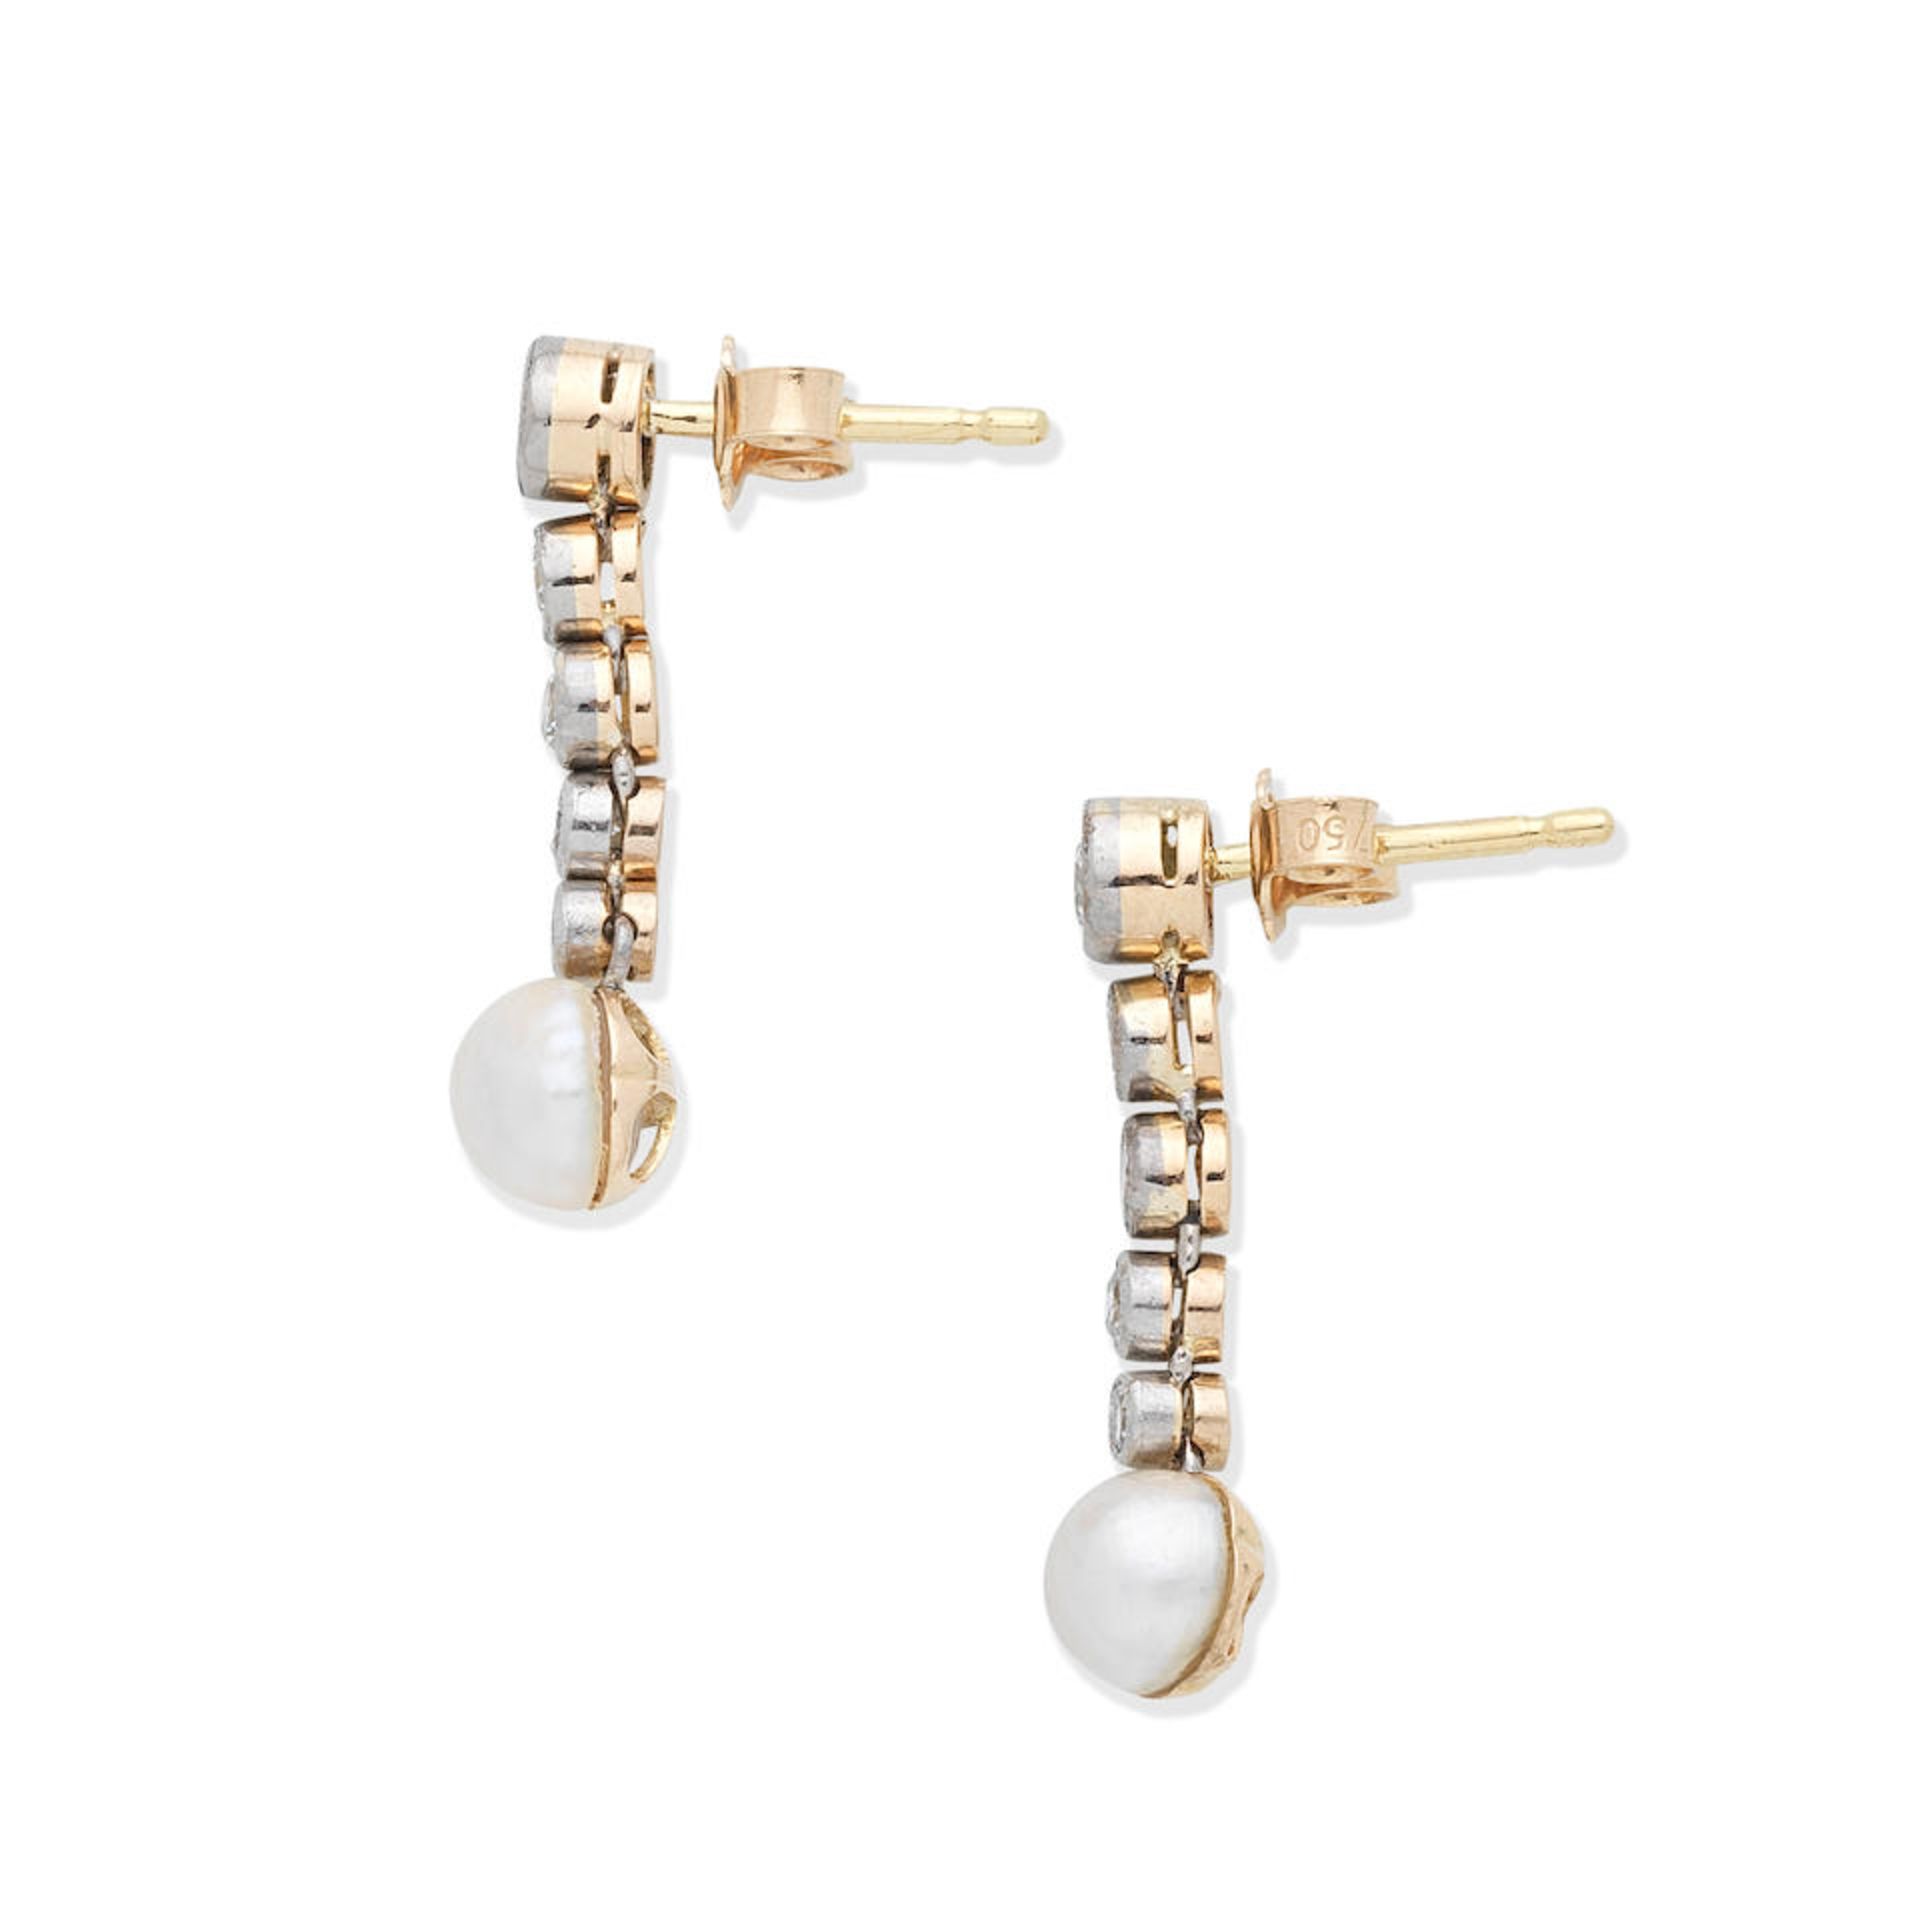 CULTURED PEARL AND DIAMOND EARRINGS - Image 2 of 3